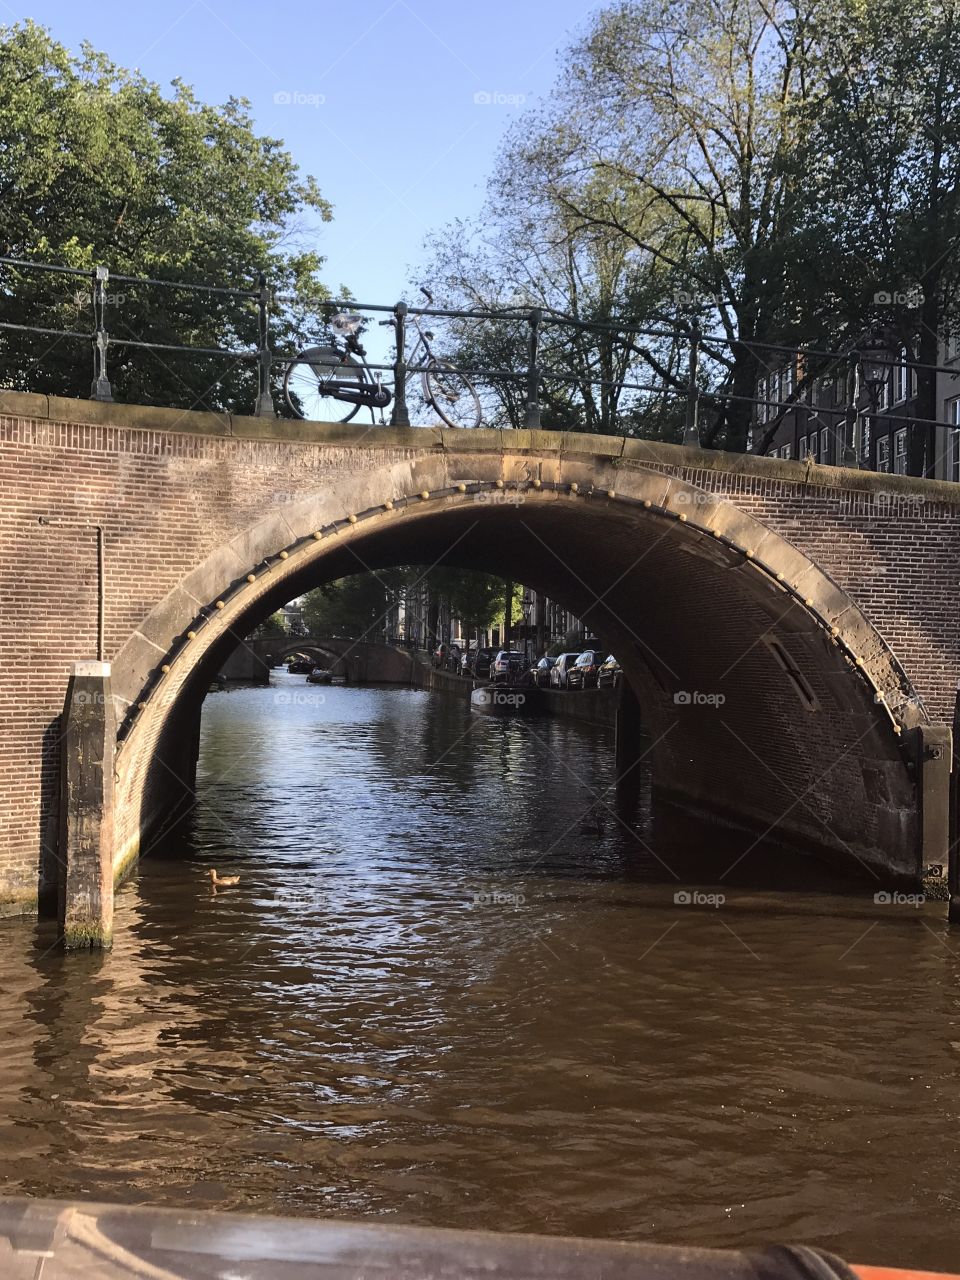 Canal
Arches
Amsterdam 
Netherlands 
Water
